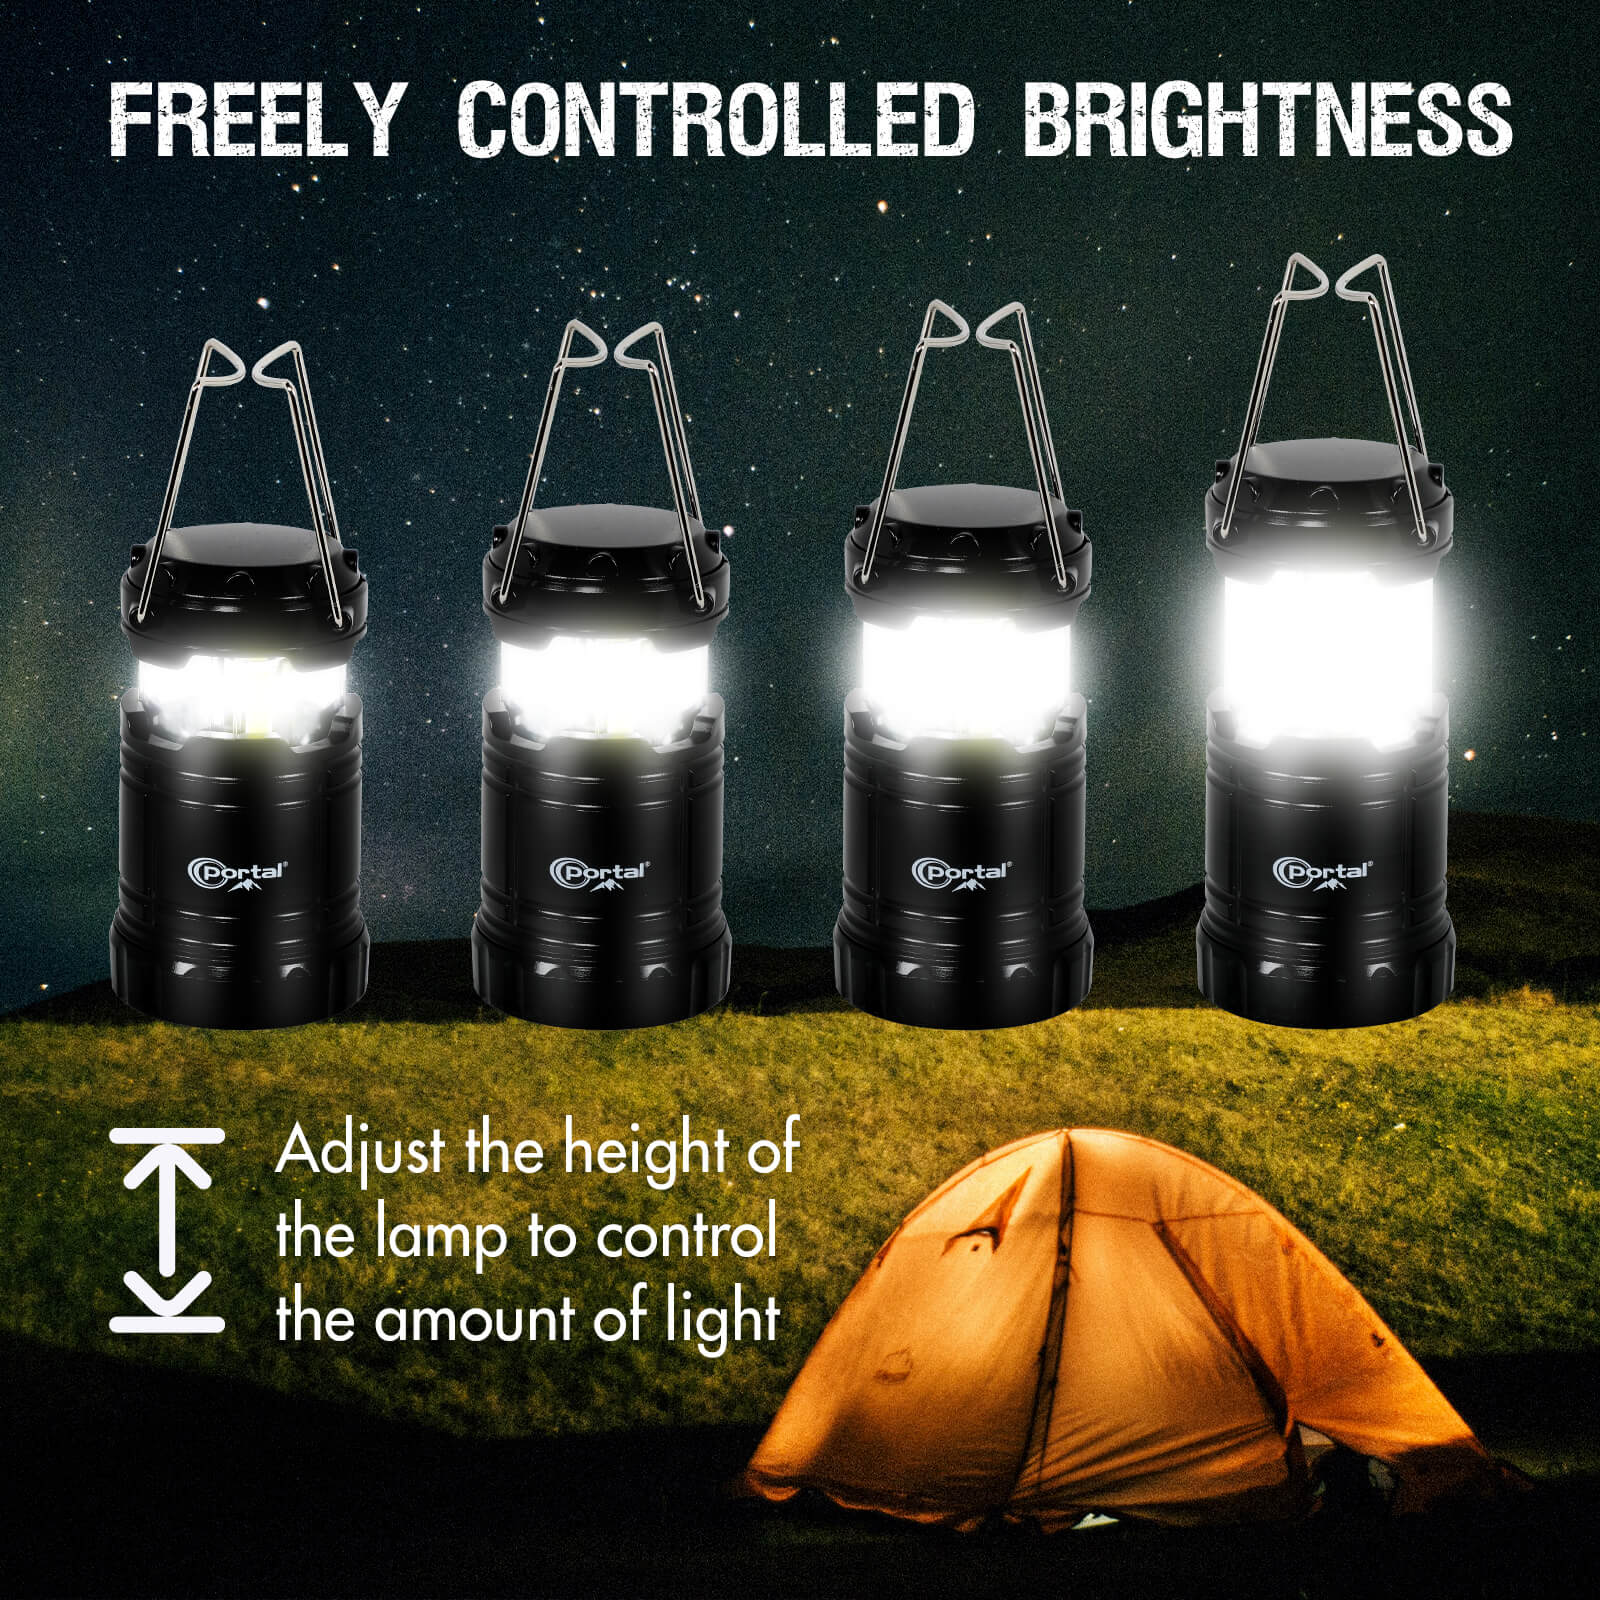 Etekcity CL10: Camping Lantern for Comping and Home Emergency